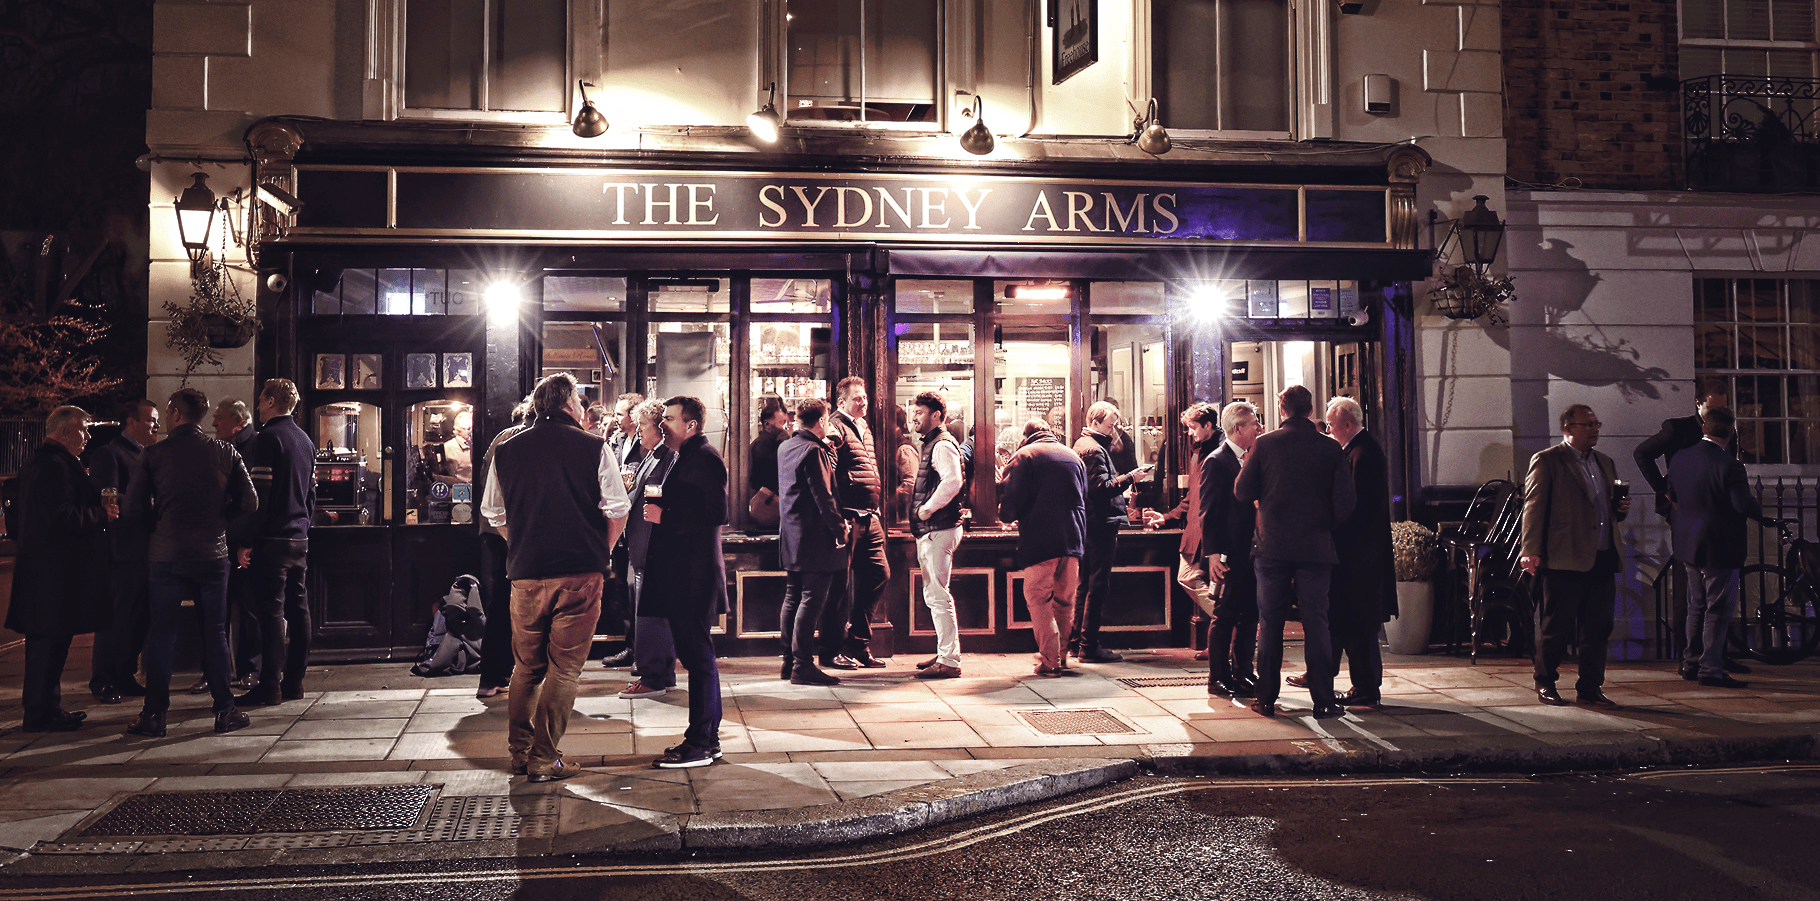 Front view of The Sydney Arms with people standing outside